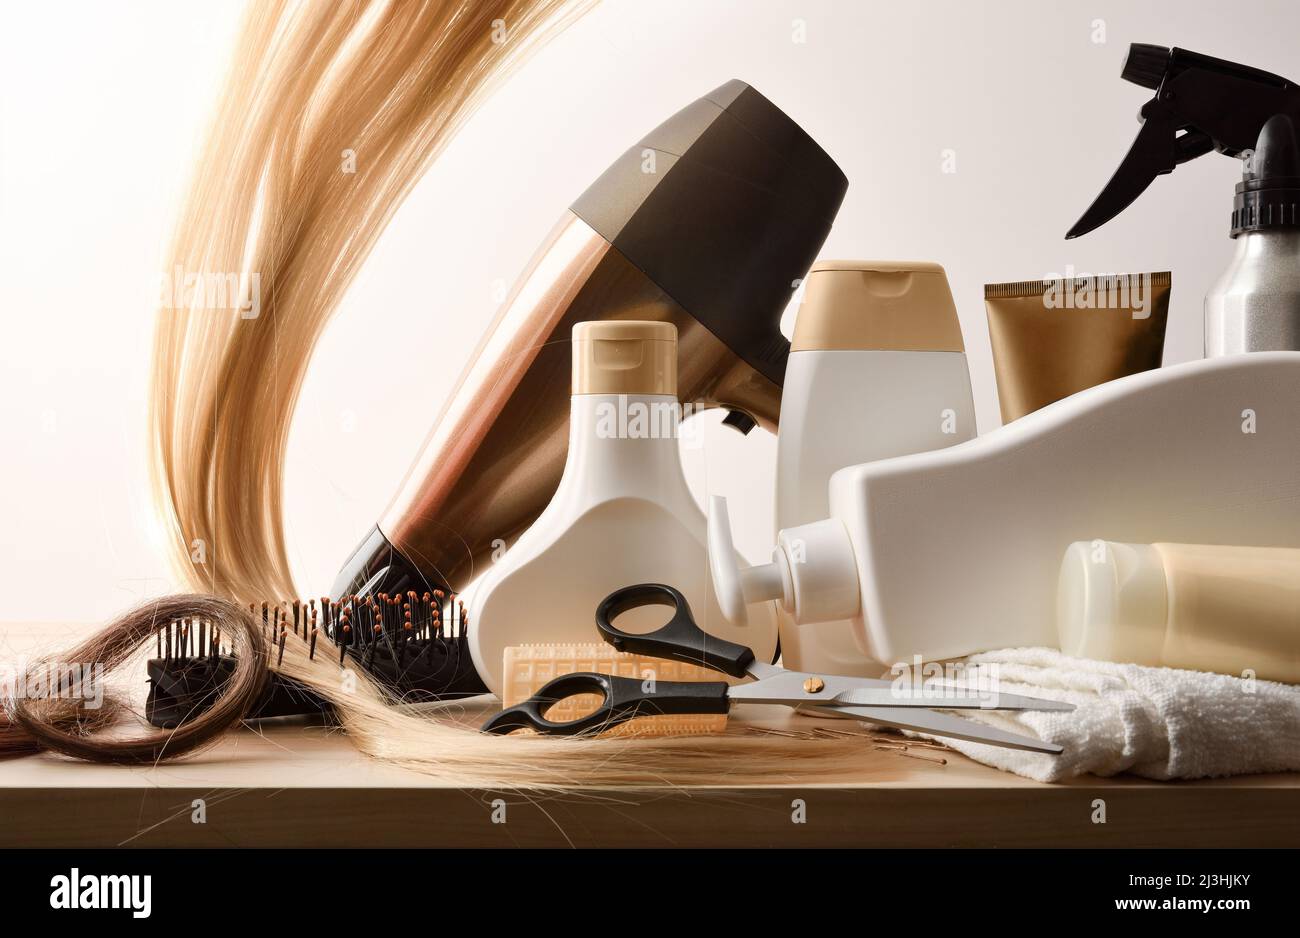 Professional hair stylist products and tools on wooden table and isolated background. Front view. Horizontal composition. Stock Photo